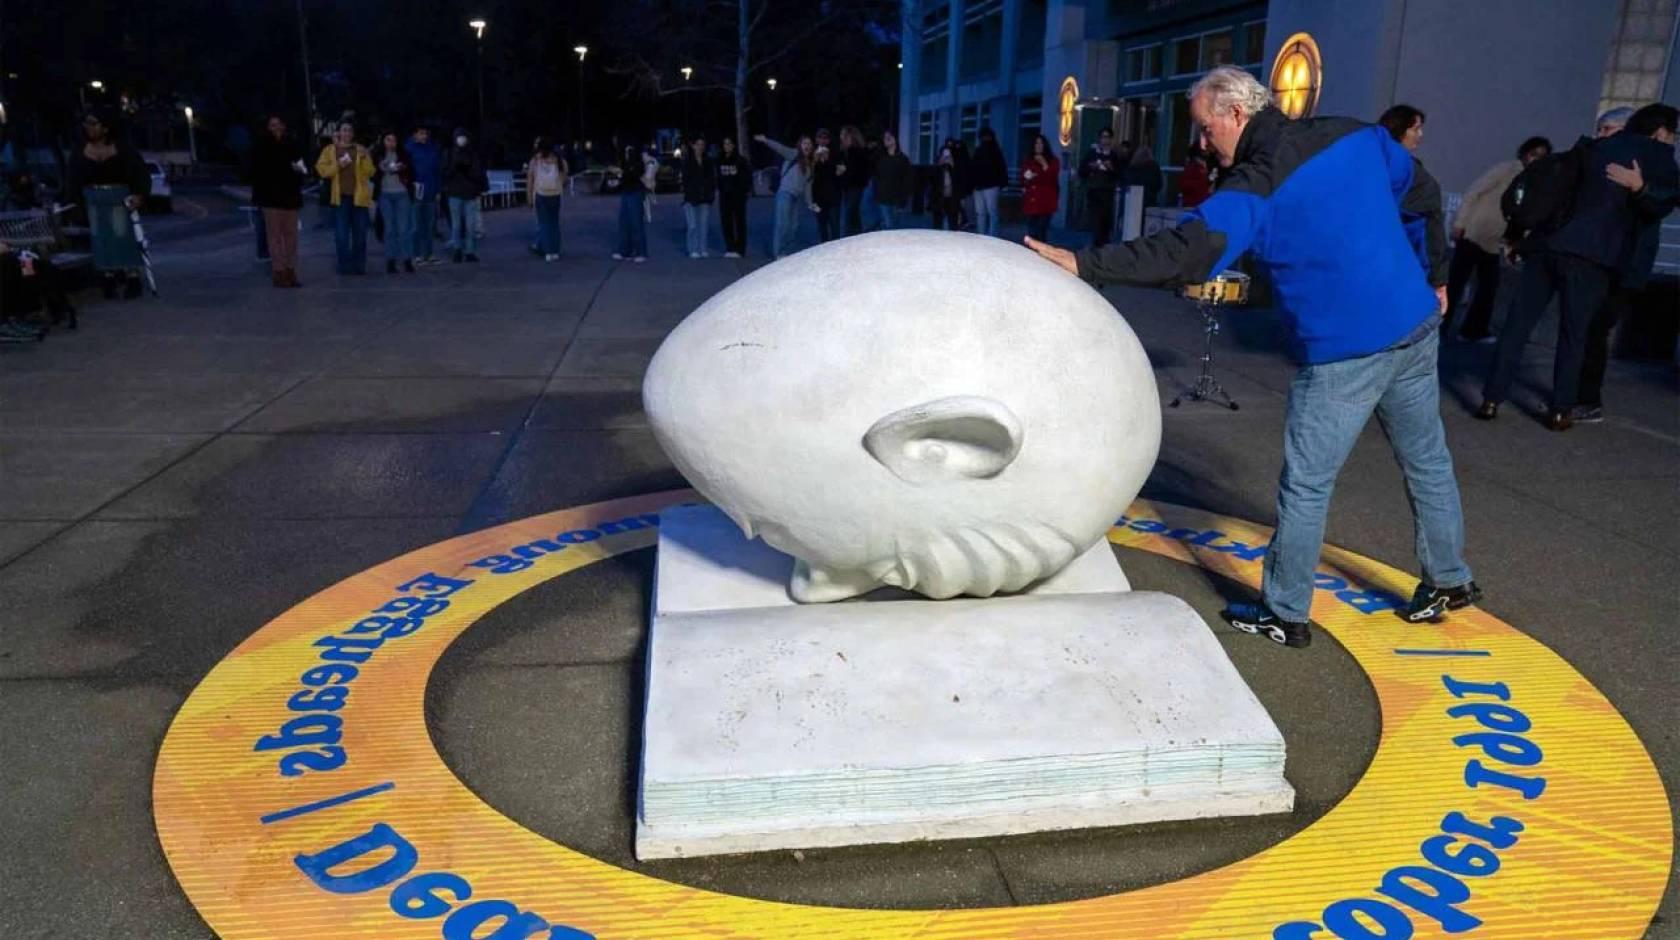 In the front of the photo, a man touches an egghead (a humorous but blank-looking human face shaped like an egg) which is faced down on a concrete open book; in the back of the photo, a line of people outside a museum at night